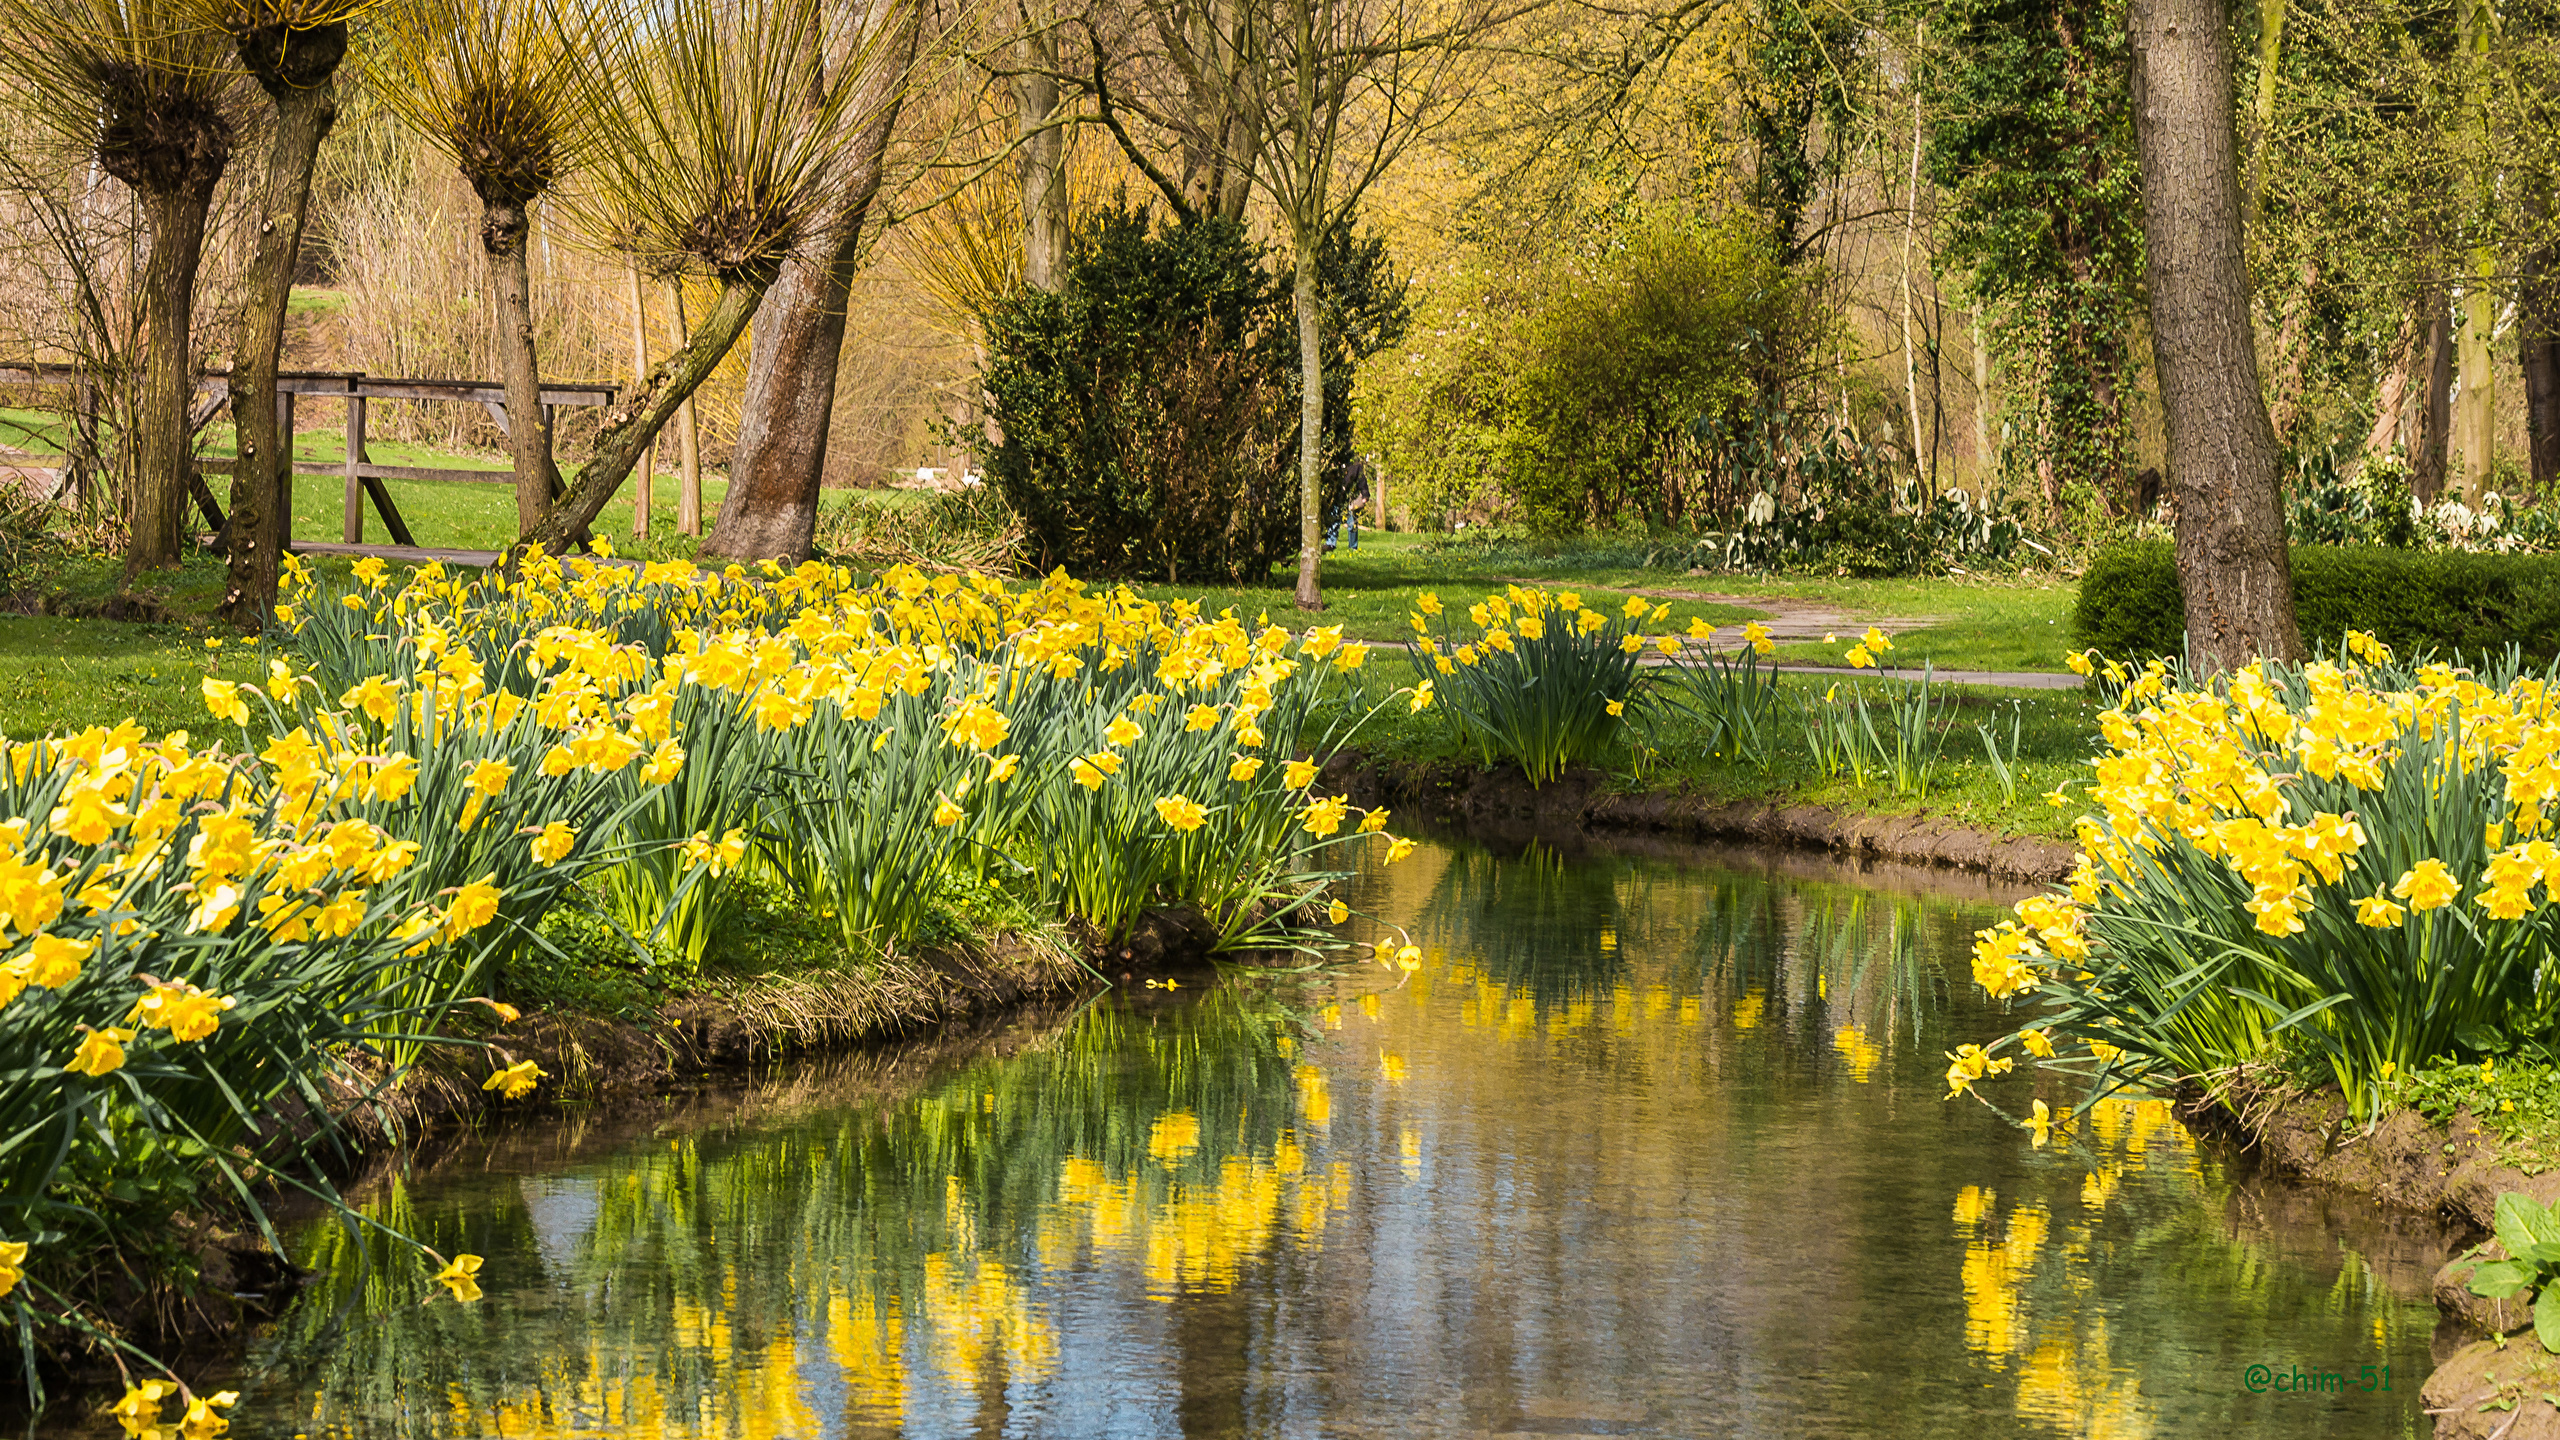 Wallpaper Spring Nature Pond Parks Daffodils Trees 2560x1440